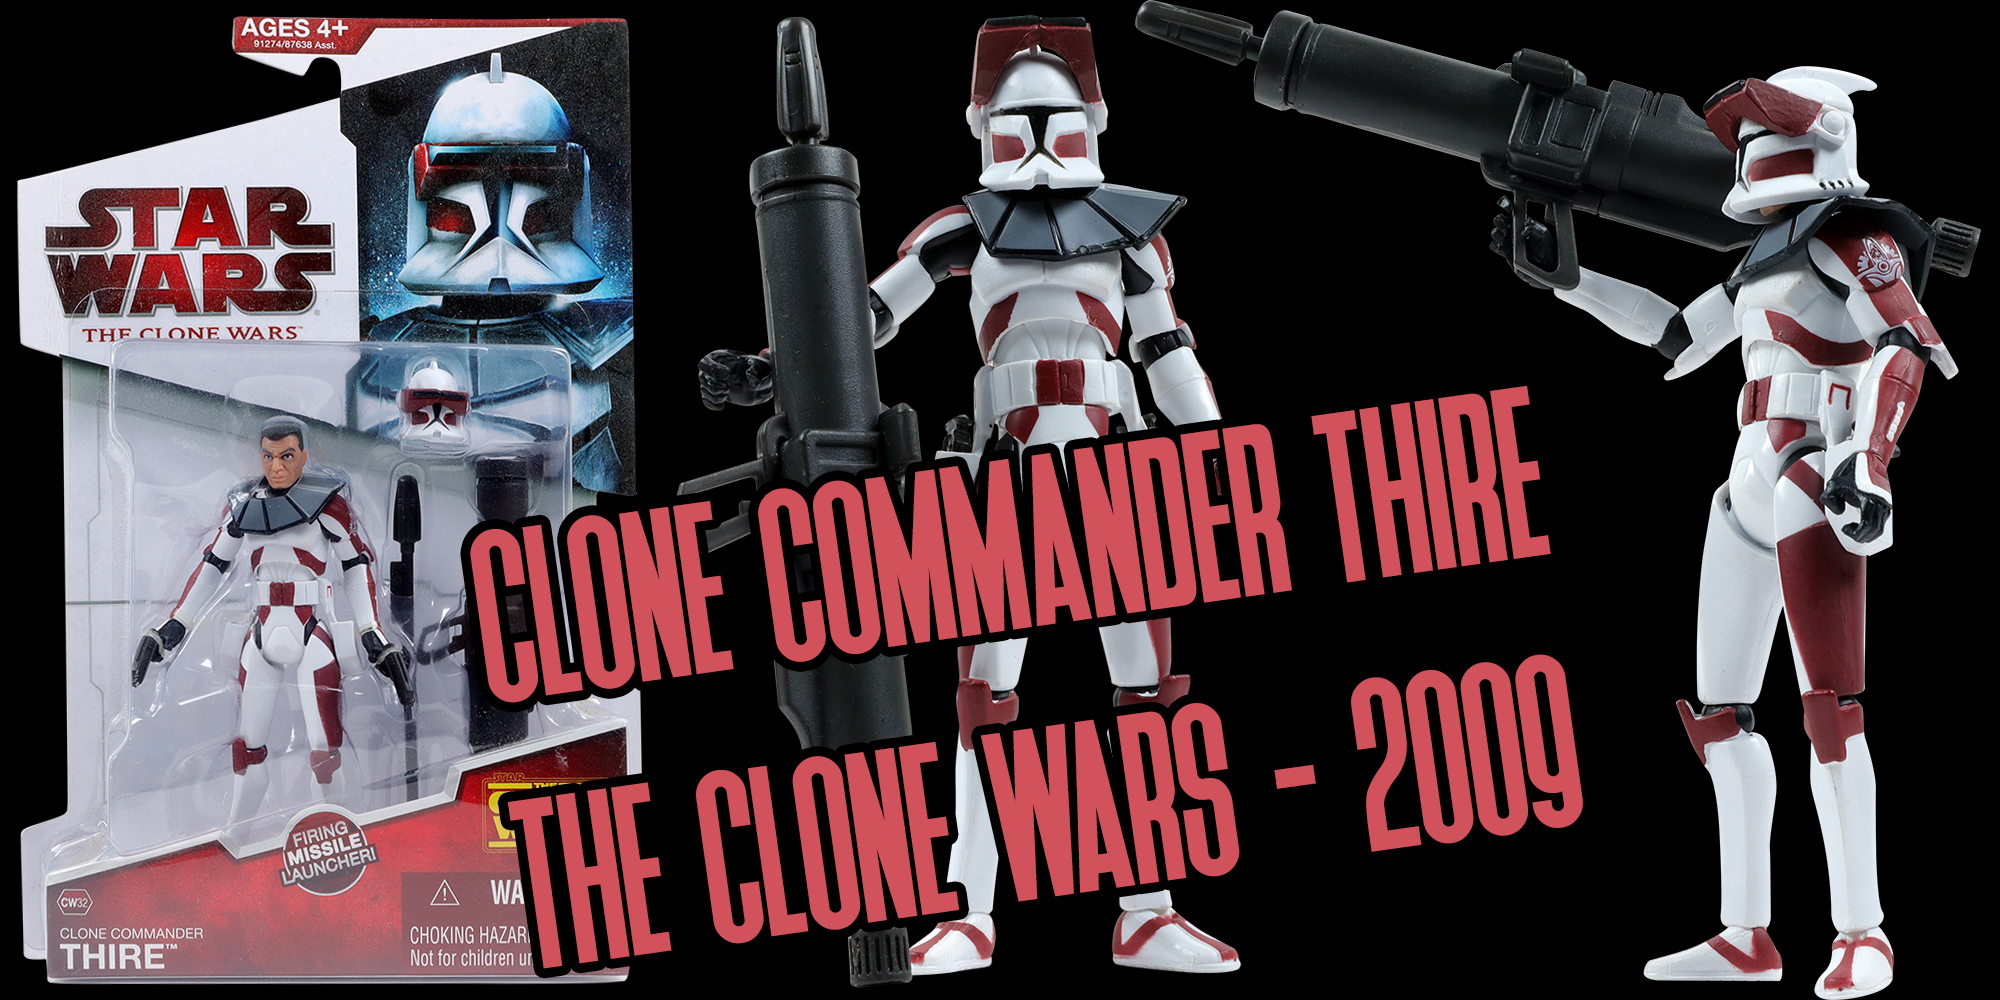 Commander Thire - The Clone Wars - Archived